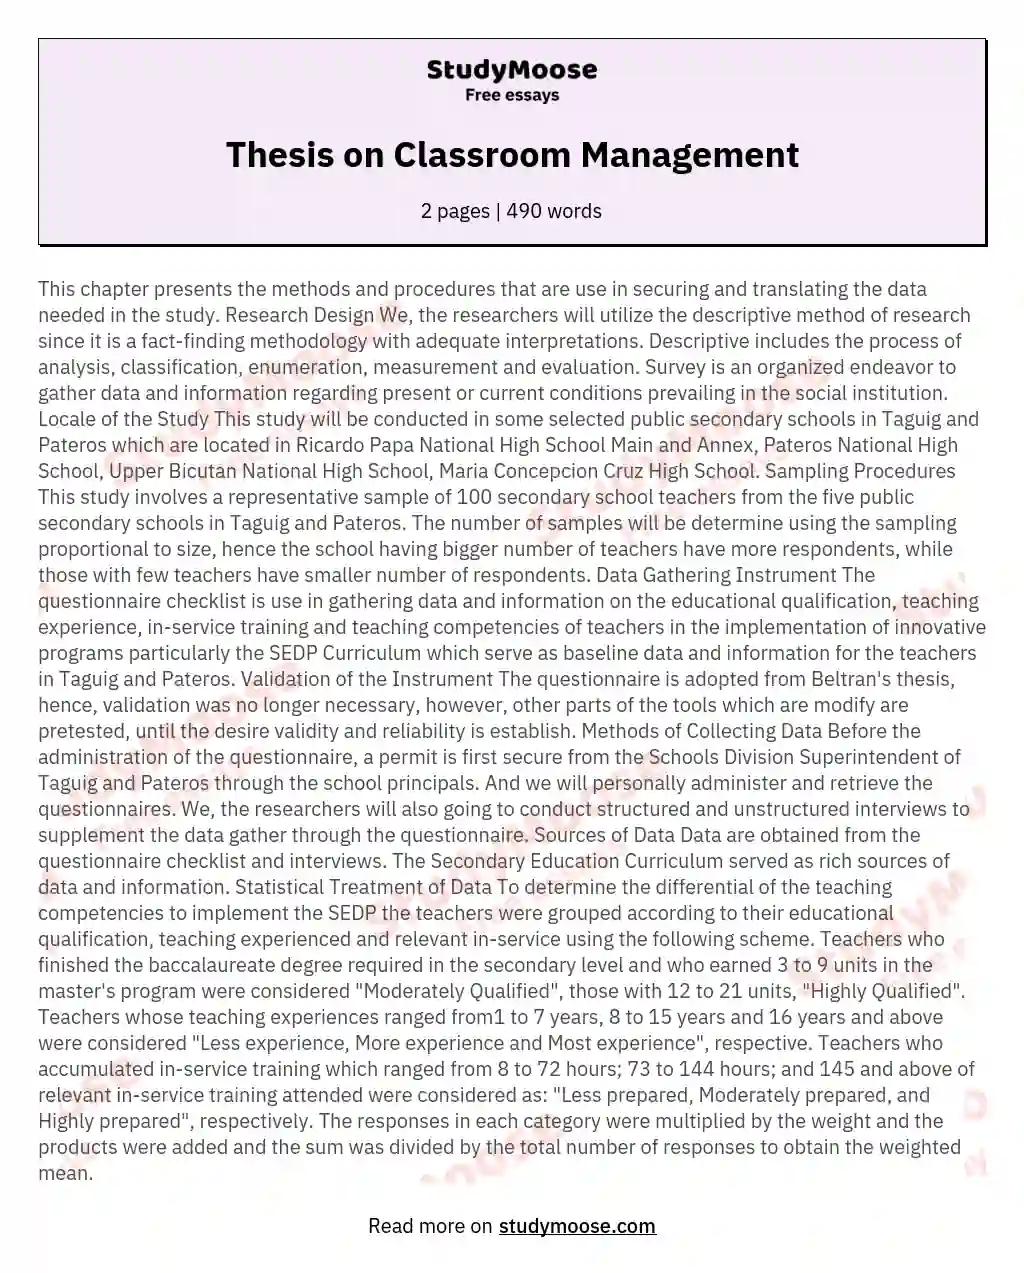 thesis of classroom management